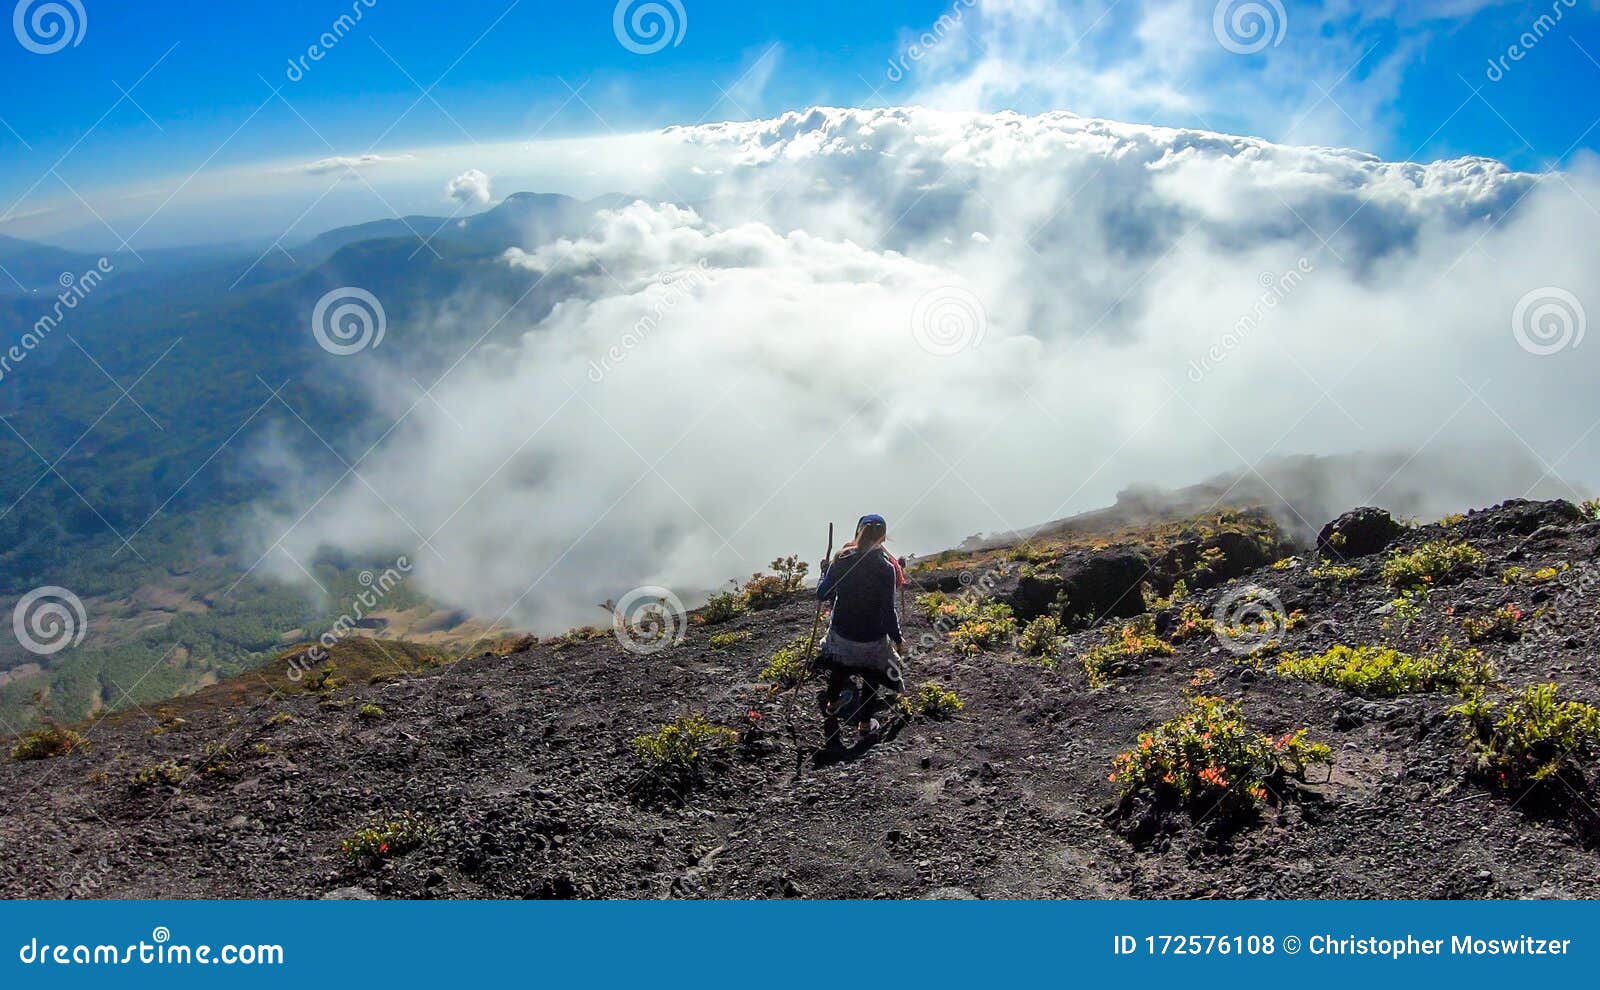 bajawa - a girl going down the volcano inierie